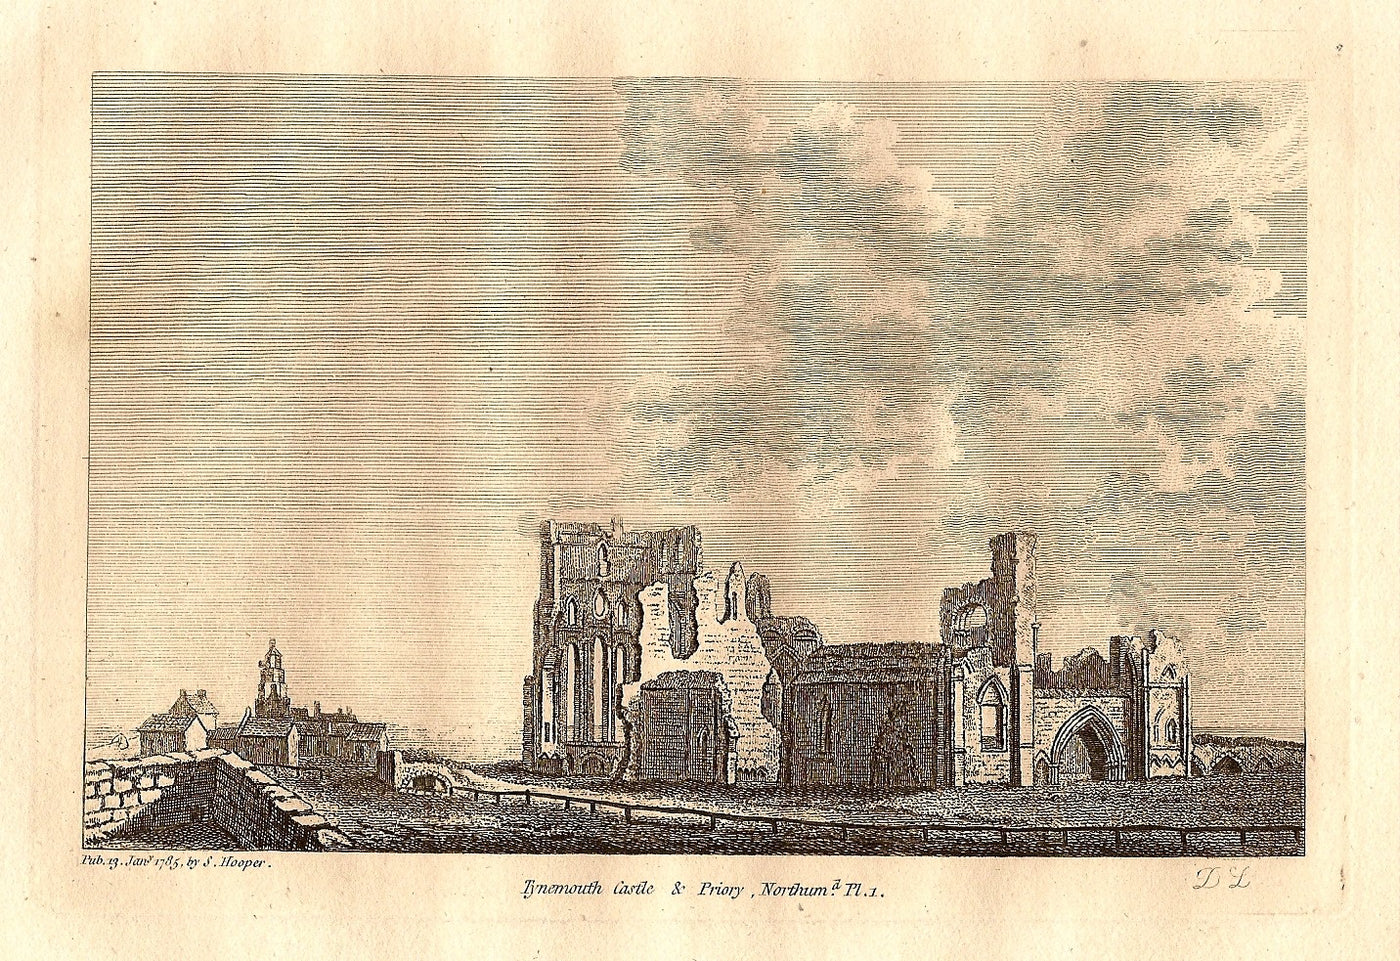 Tynemouth Castle & Priory Northumberland antique print 1785